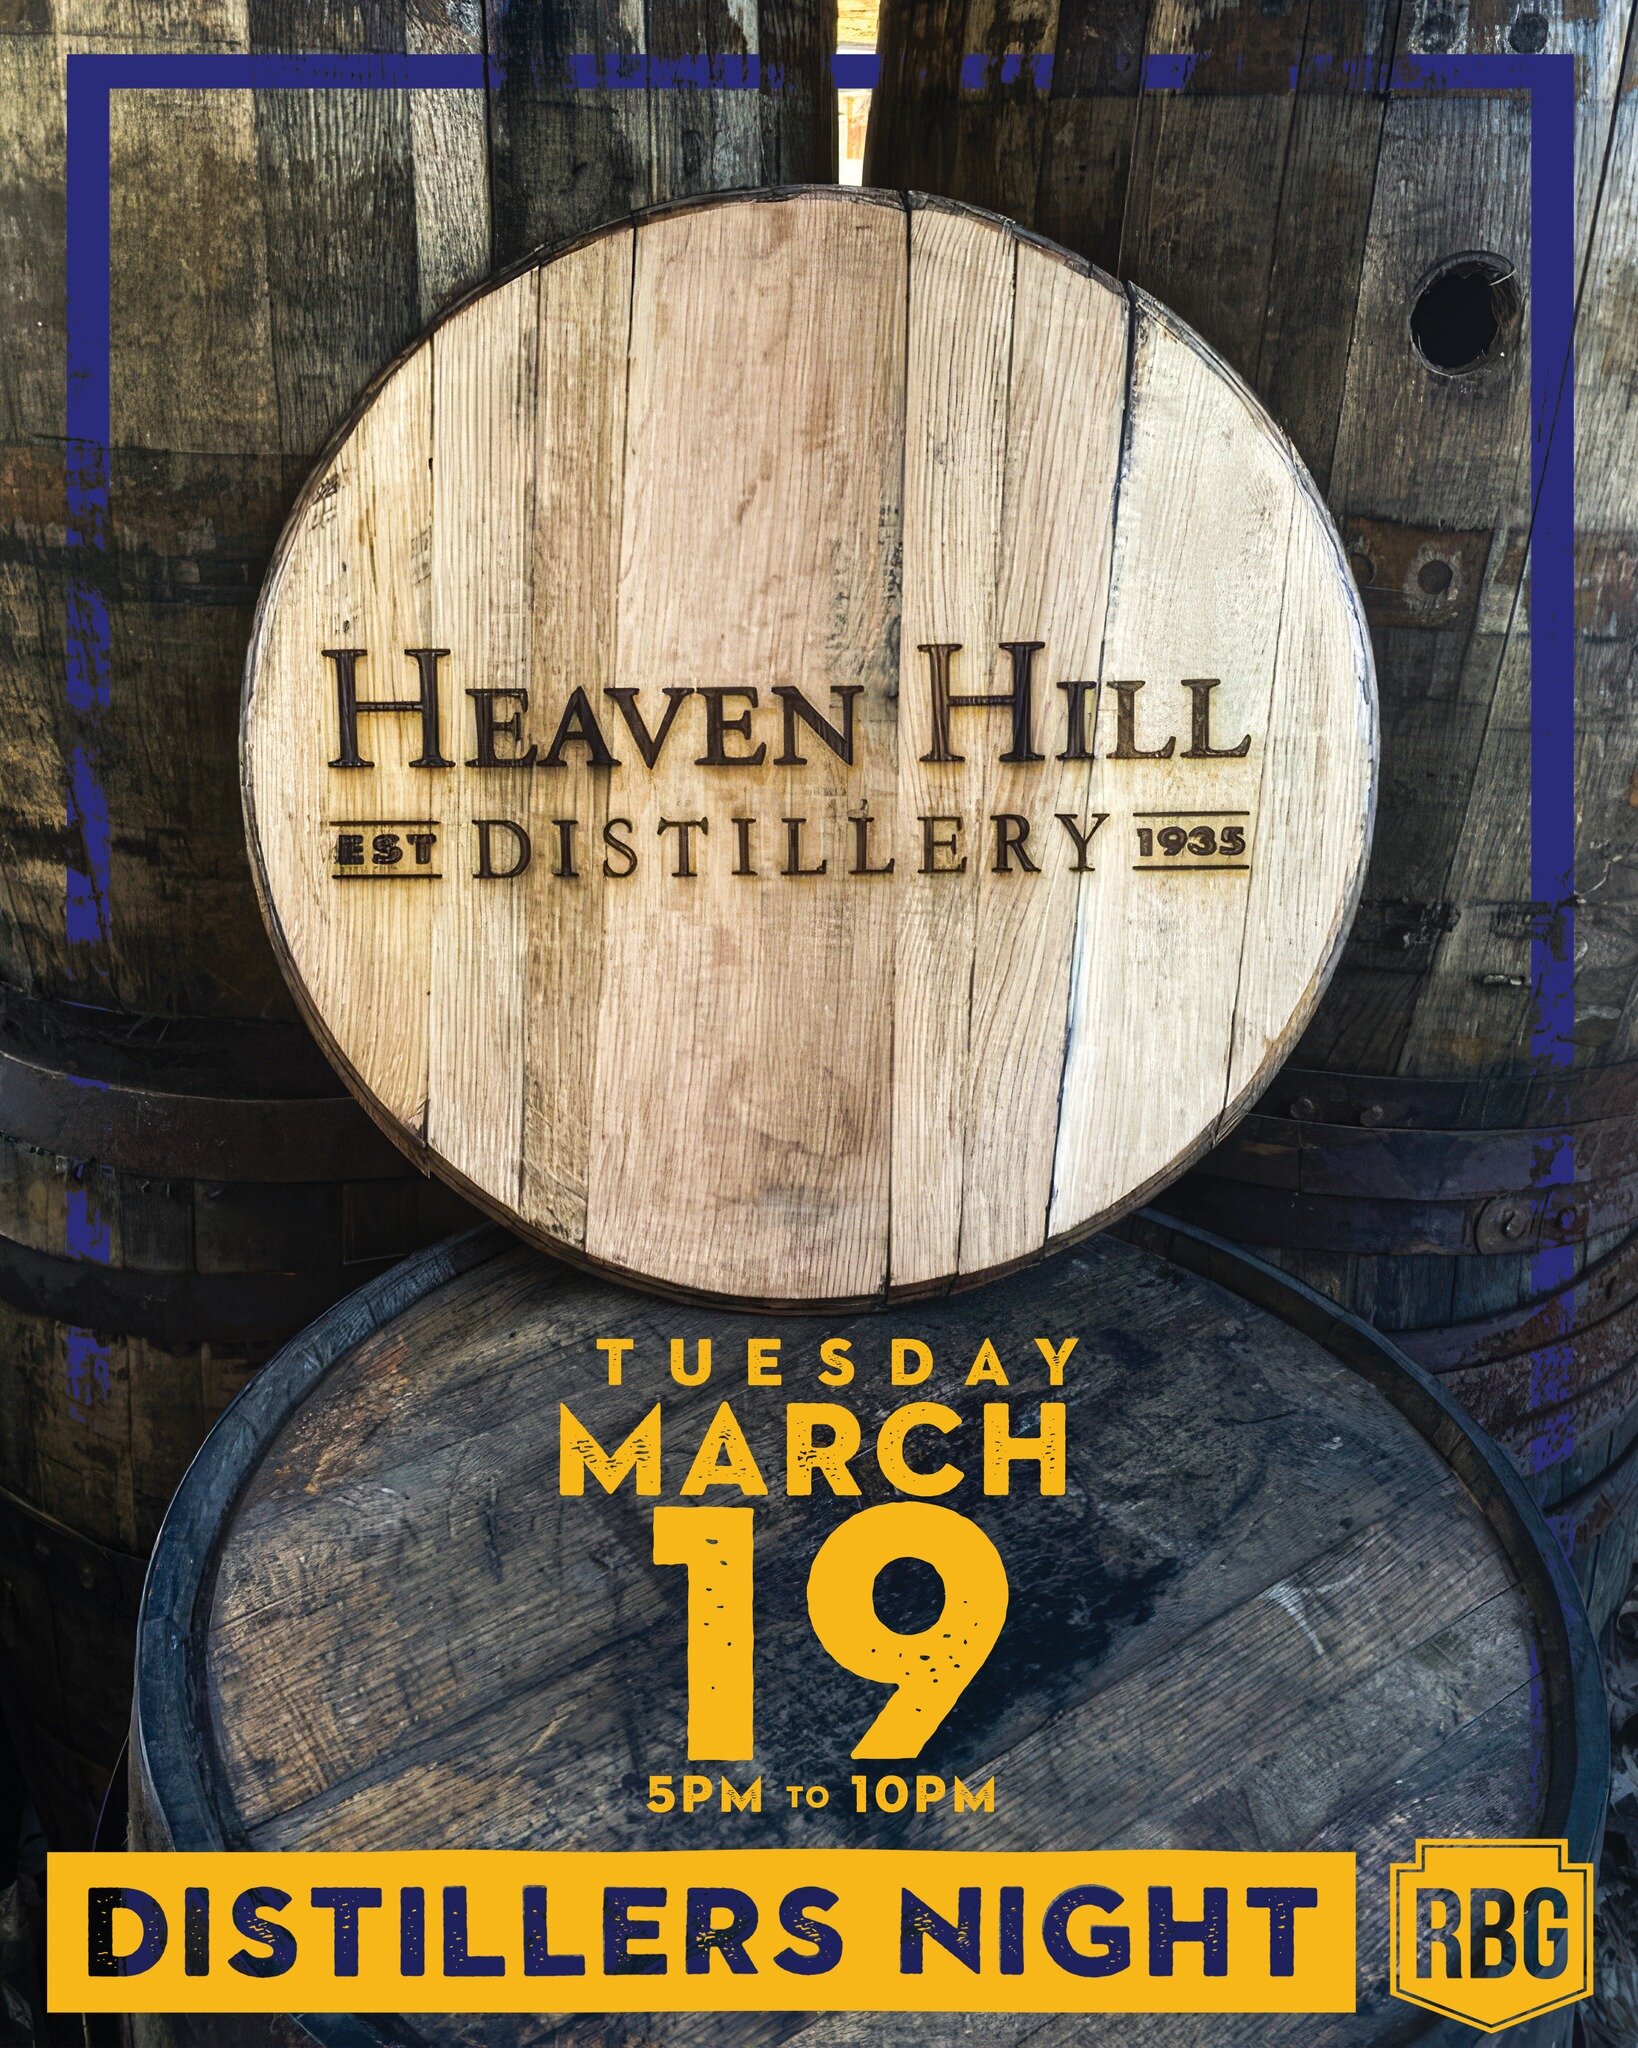 Happy Taco Tuesday!!!! 🌮🌮😊

HEAVEN HILL DISTILLERY IS HERE WITH US TONIGHT! 🥃

TRIVIA TOPICS:
*Ad Slogans
*7th Grade Math
*Pictures - Seattle Logos
*Music - Postmodern Jukebox
*and Rhyme Time

**BONUS - What are the first names of Mr. Harley and 